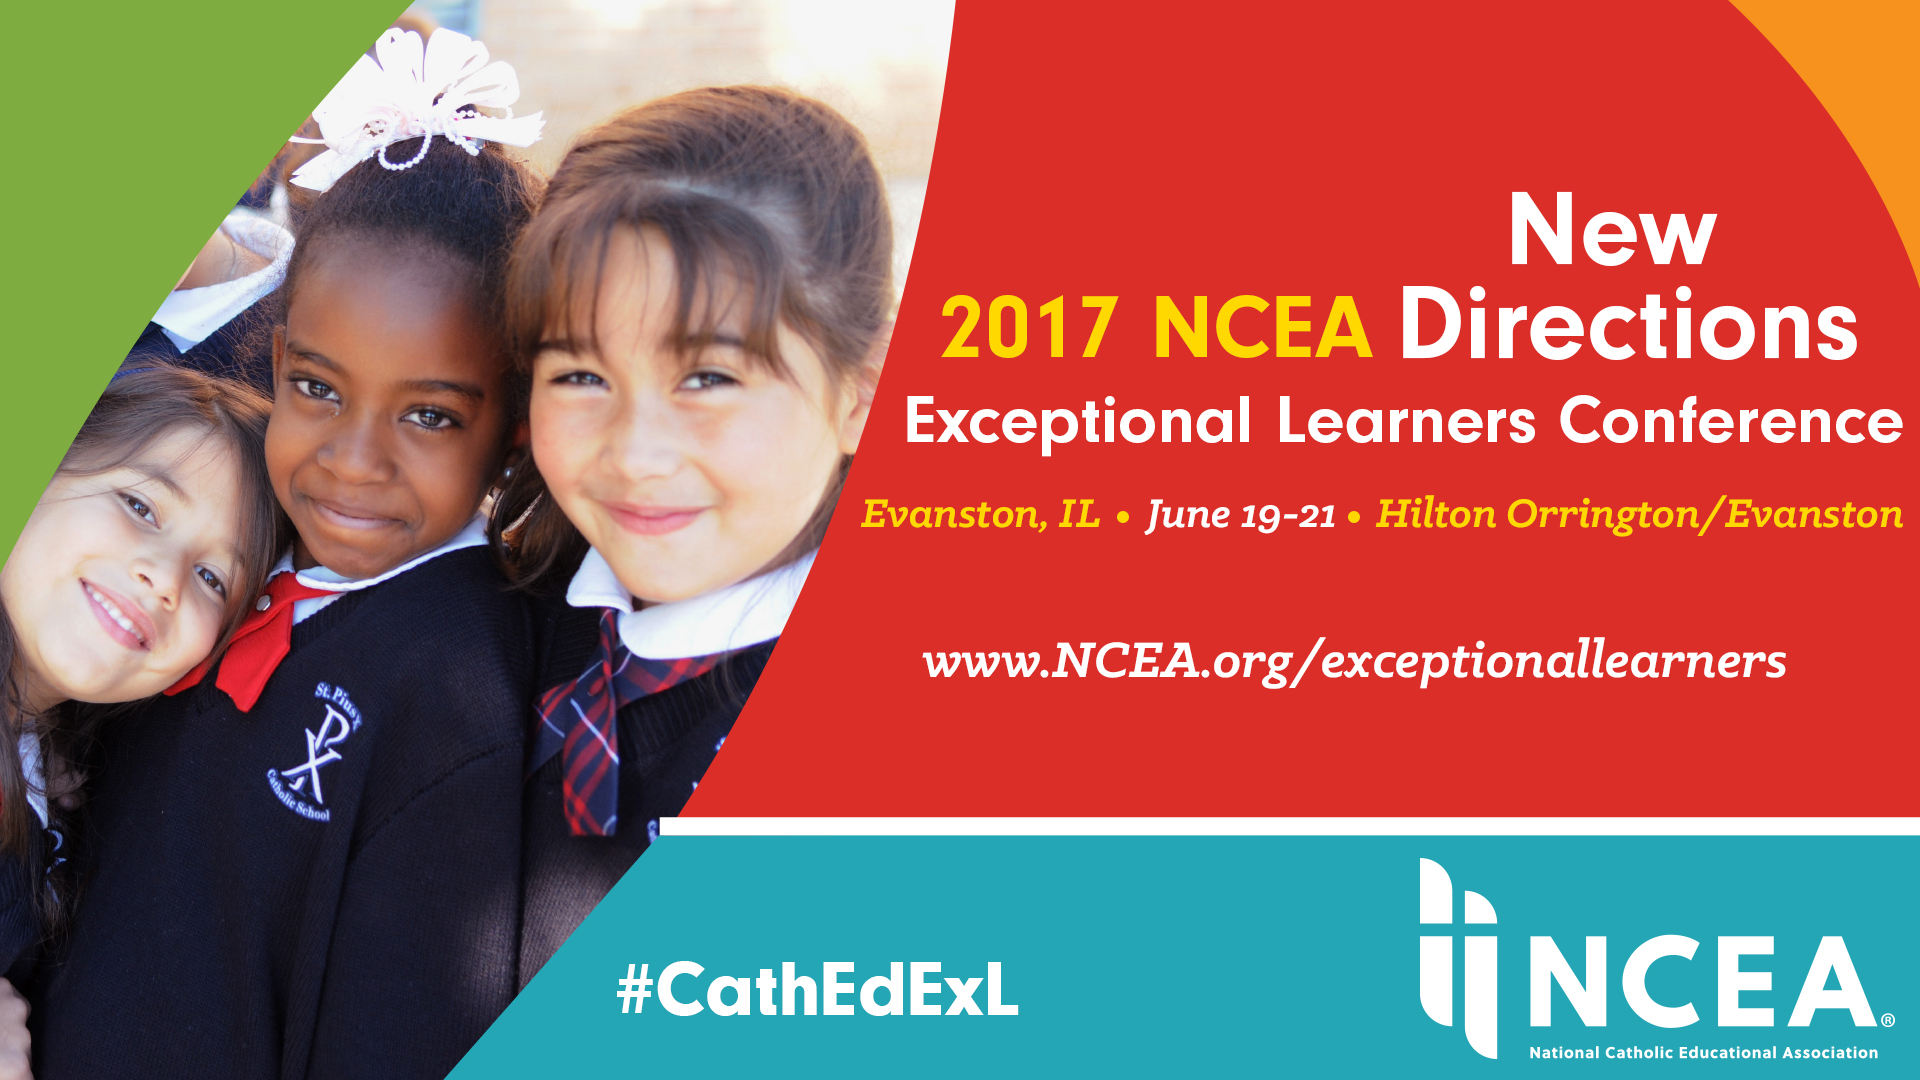 2017 NCEA New Directions Exceptional Learners Conference